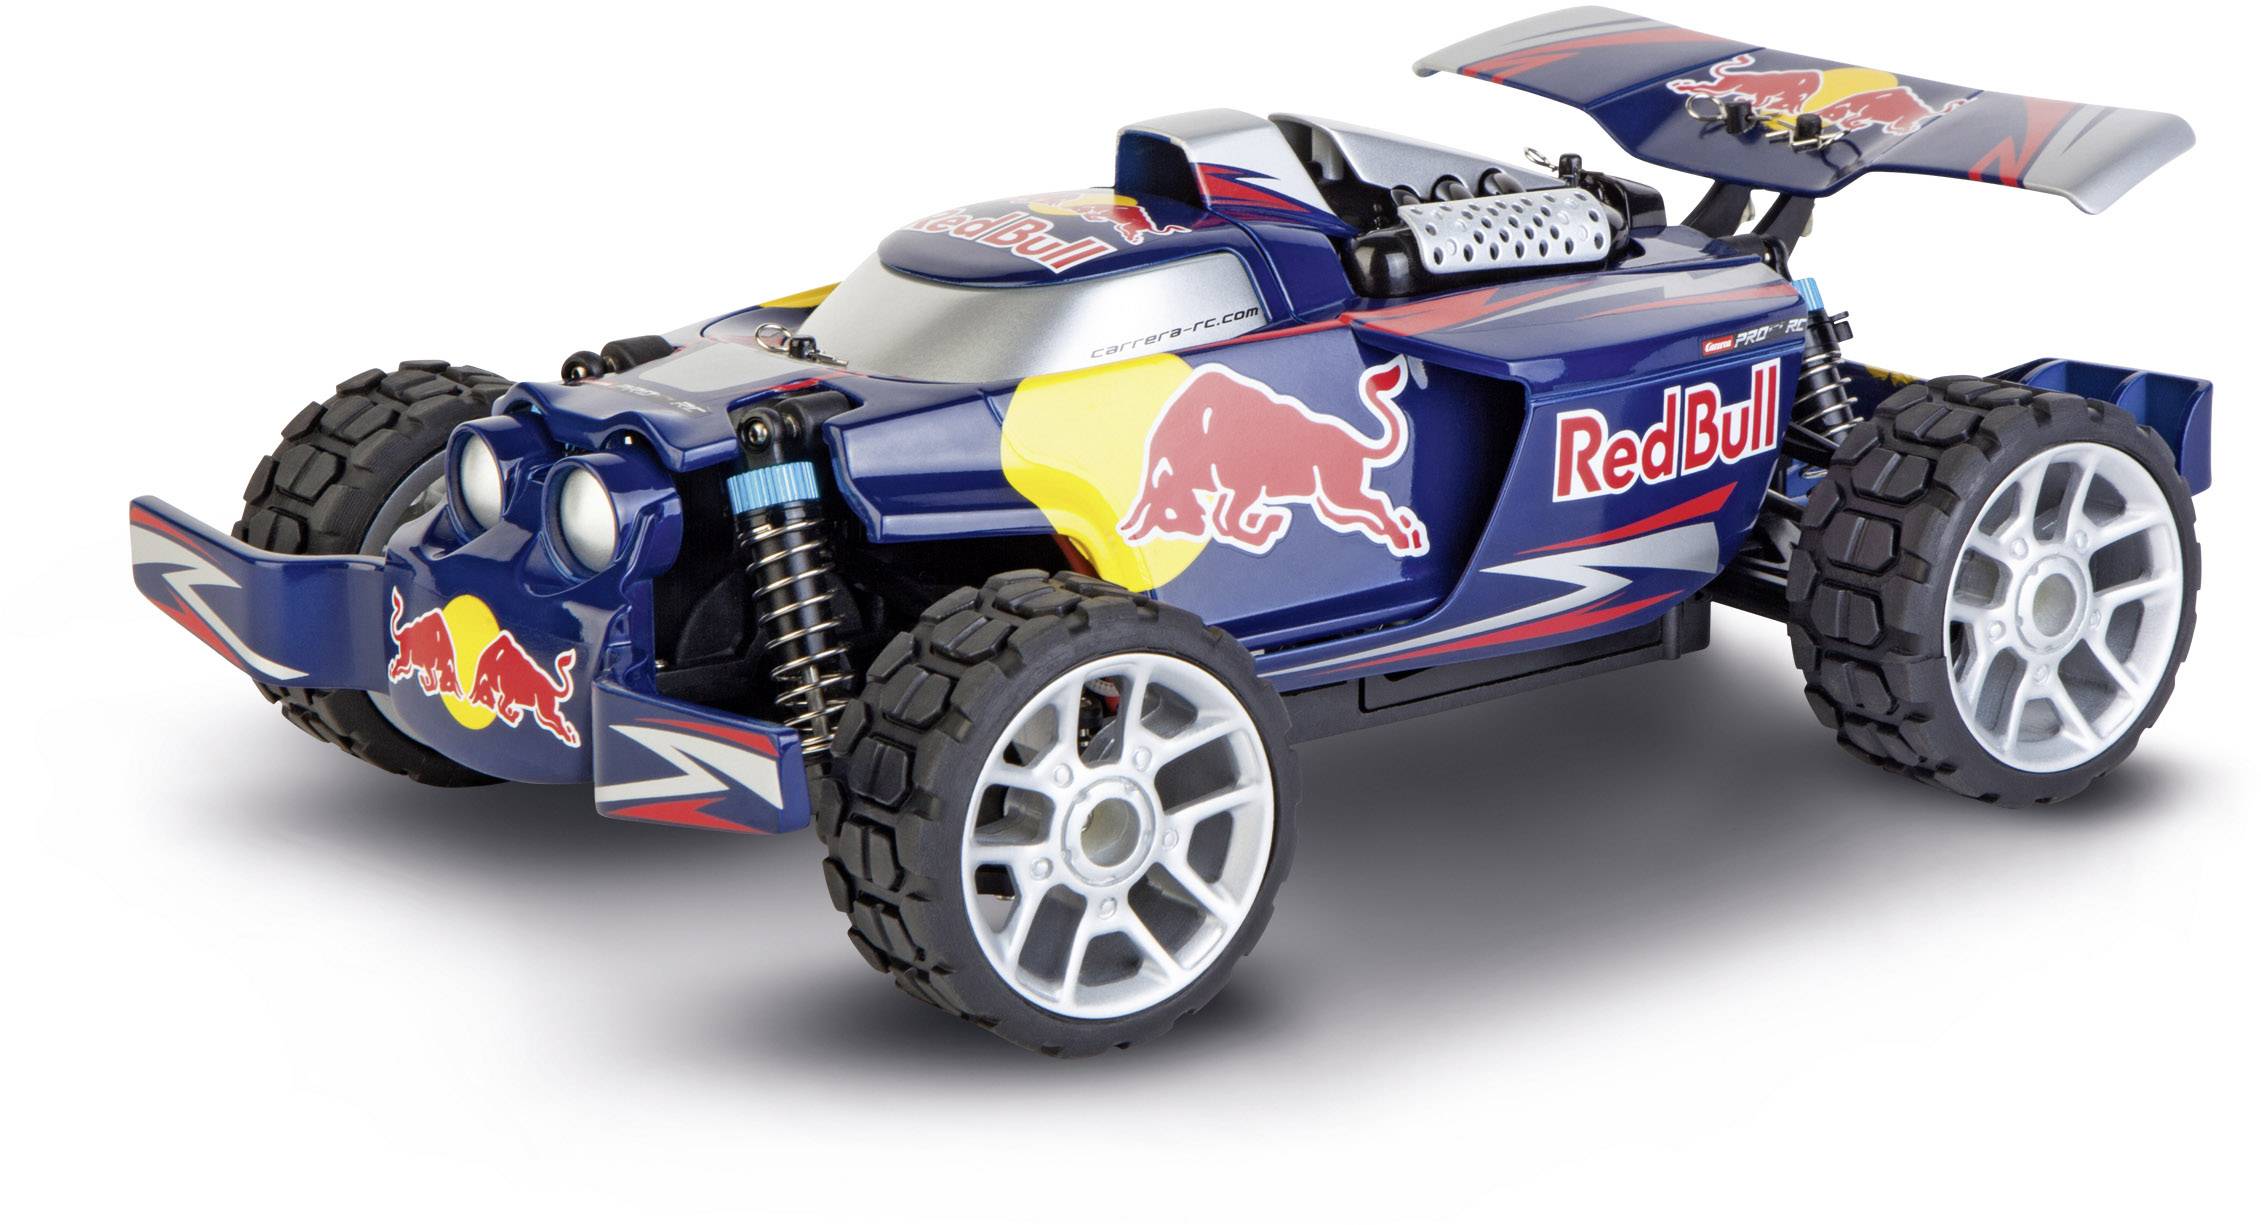 Carrera RC 370183015 Red Bull NX2 1:18 RC model car beginners Electric Monster truck 4WD Incl. batteries and charger | Conrad.com